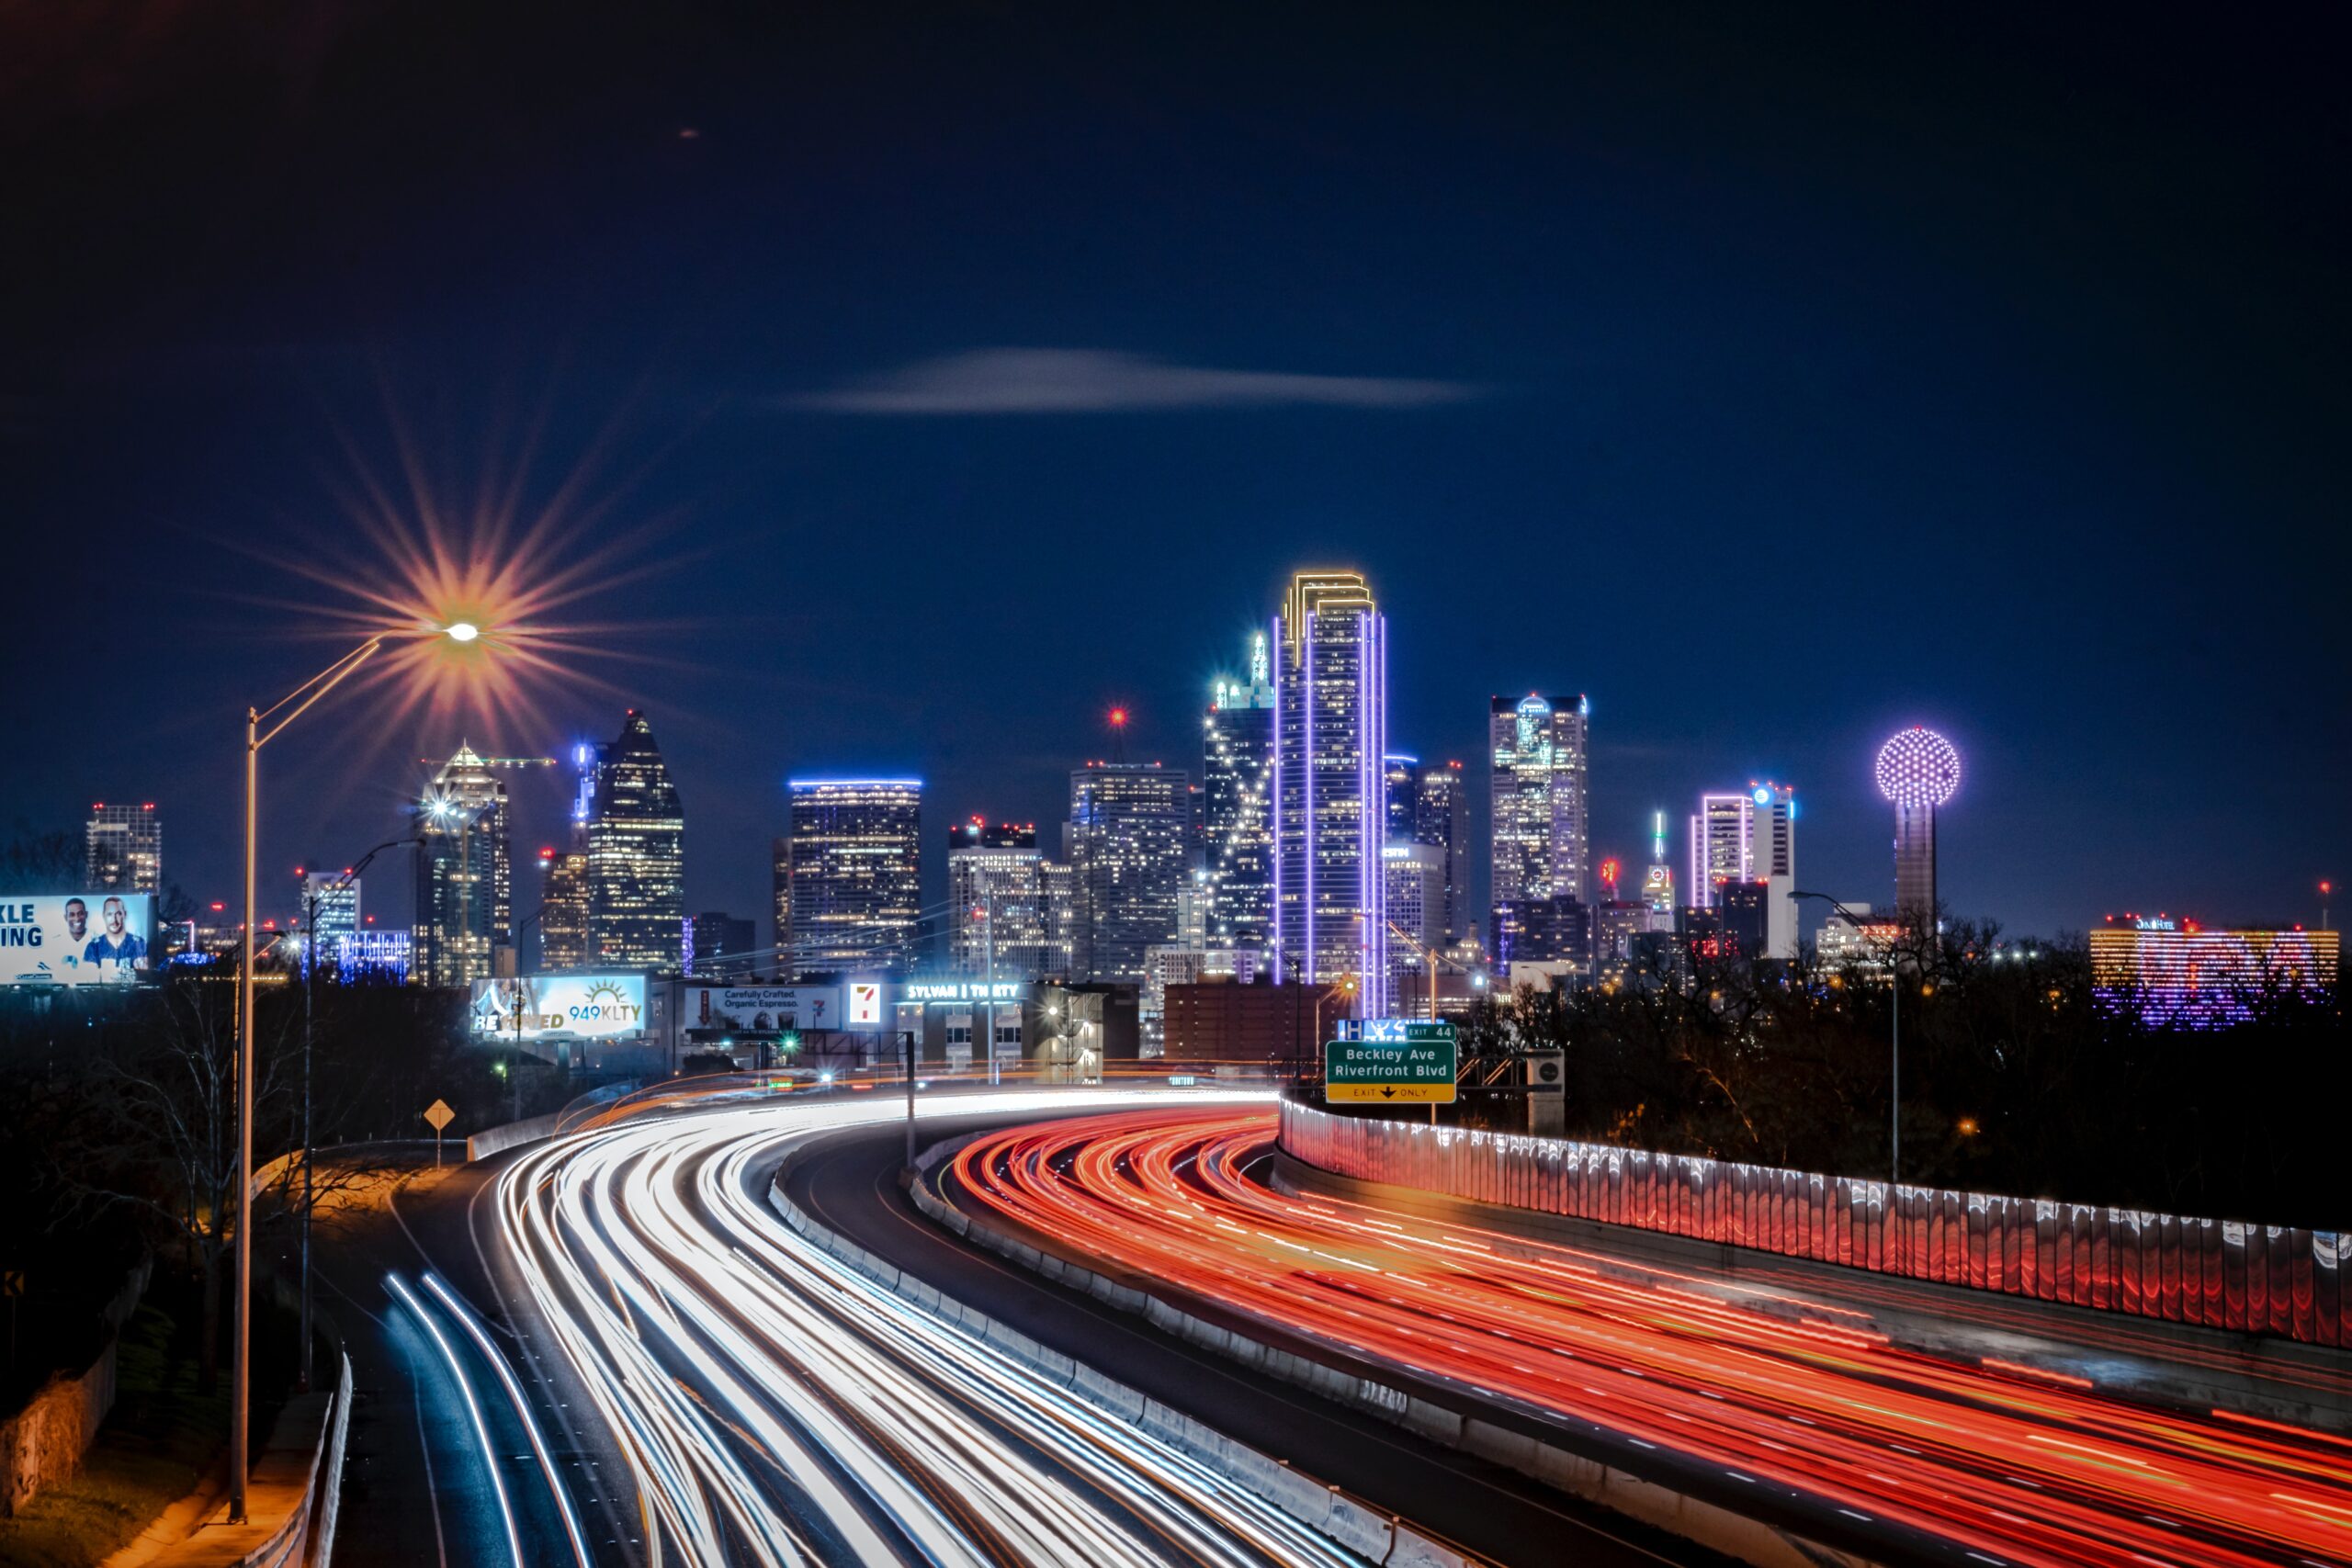 Nighttime view of a city skyline, possibly Dallas, with light trails from vehicular traffic on a highway.